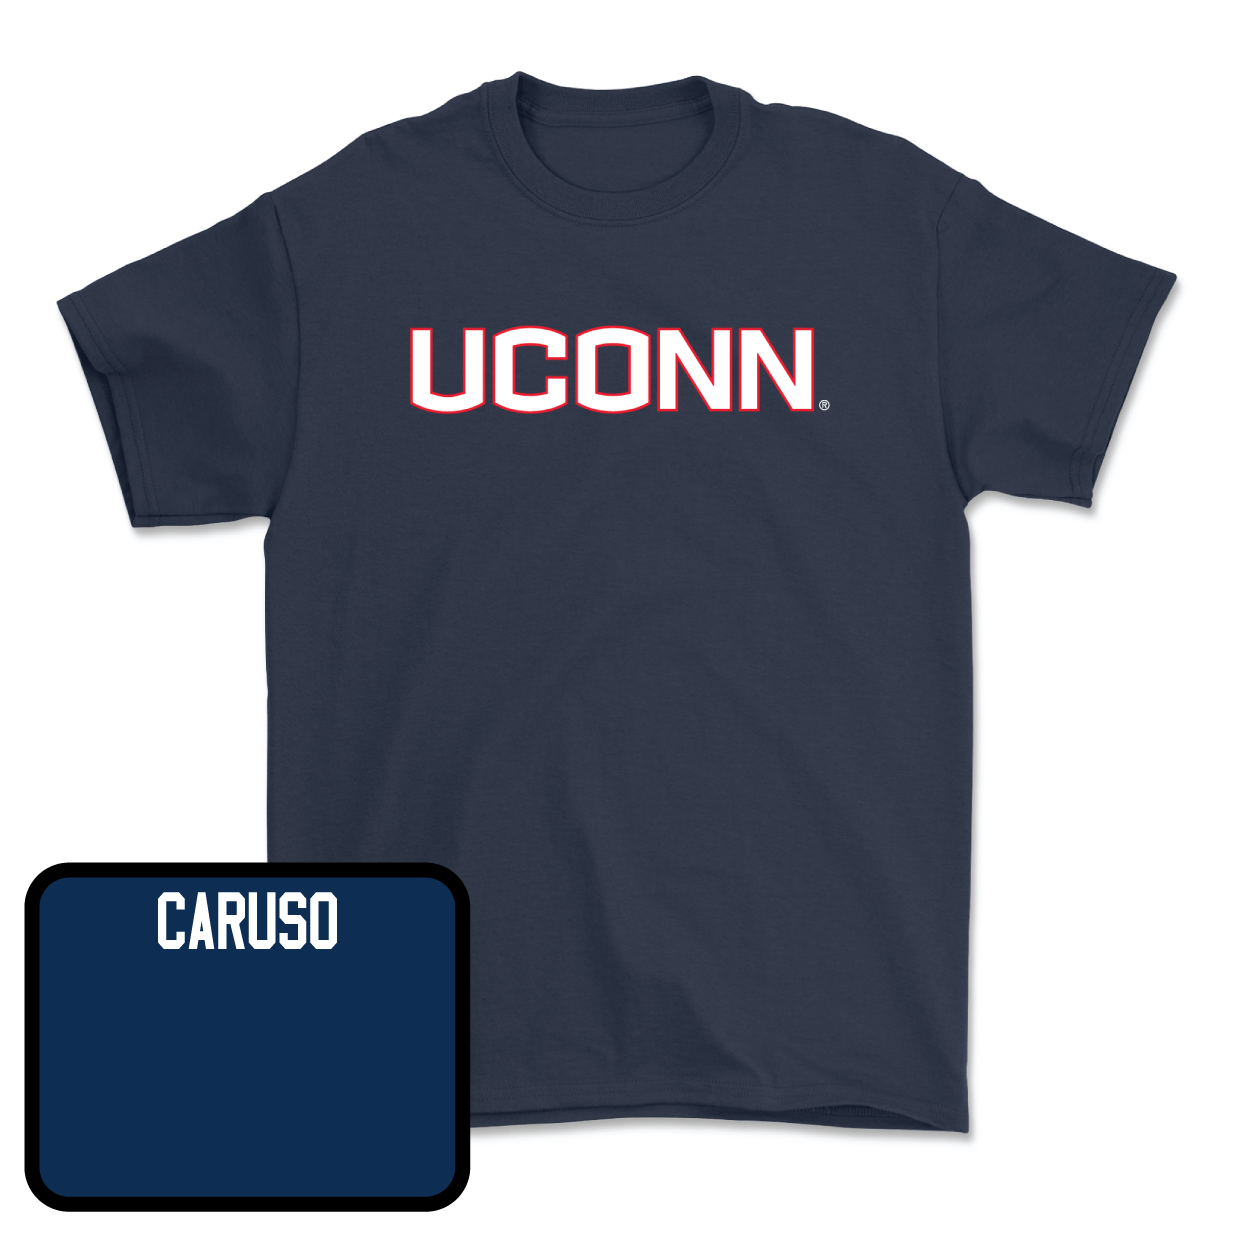 Navy Women's Rowing UConn Tee Youth Large / Riley Caruso